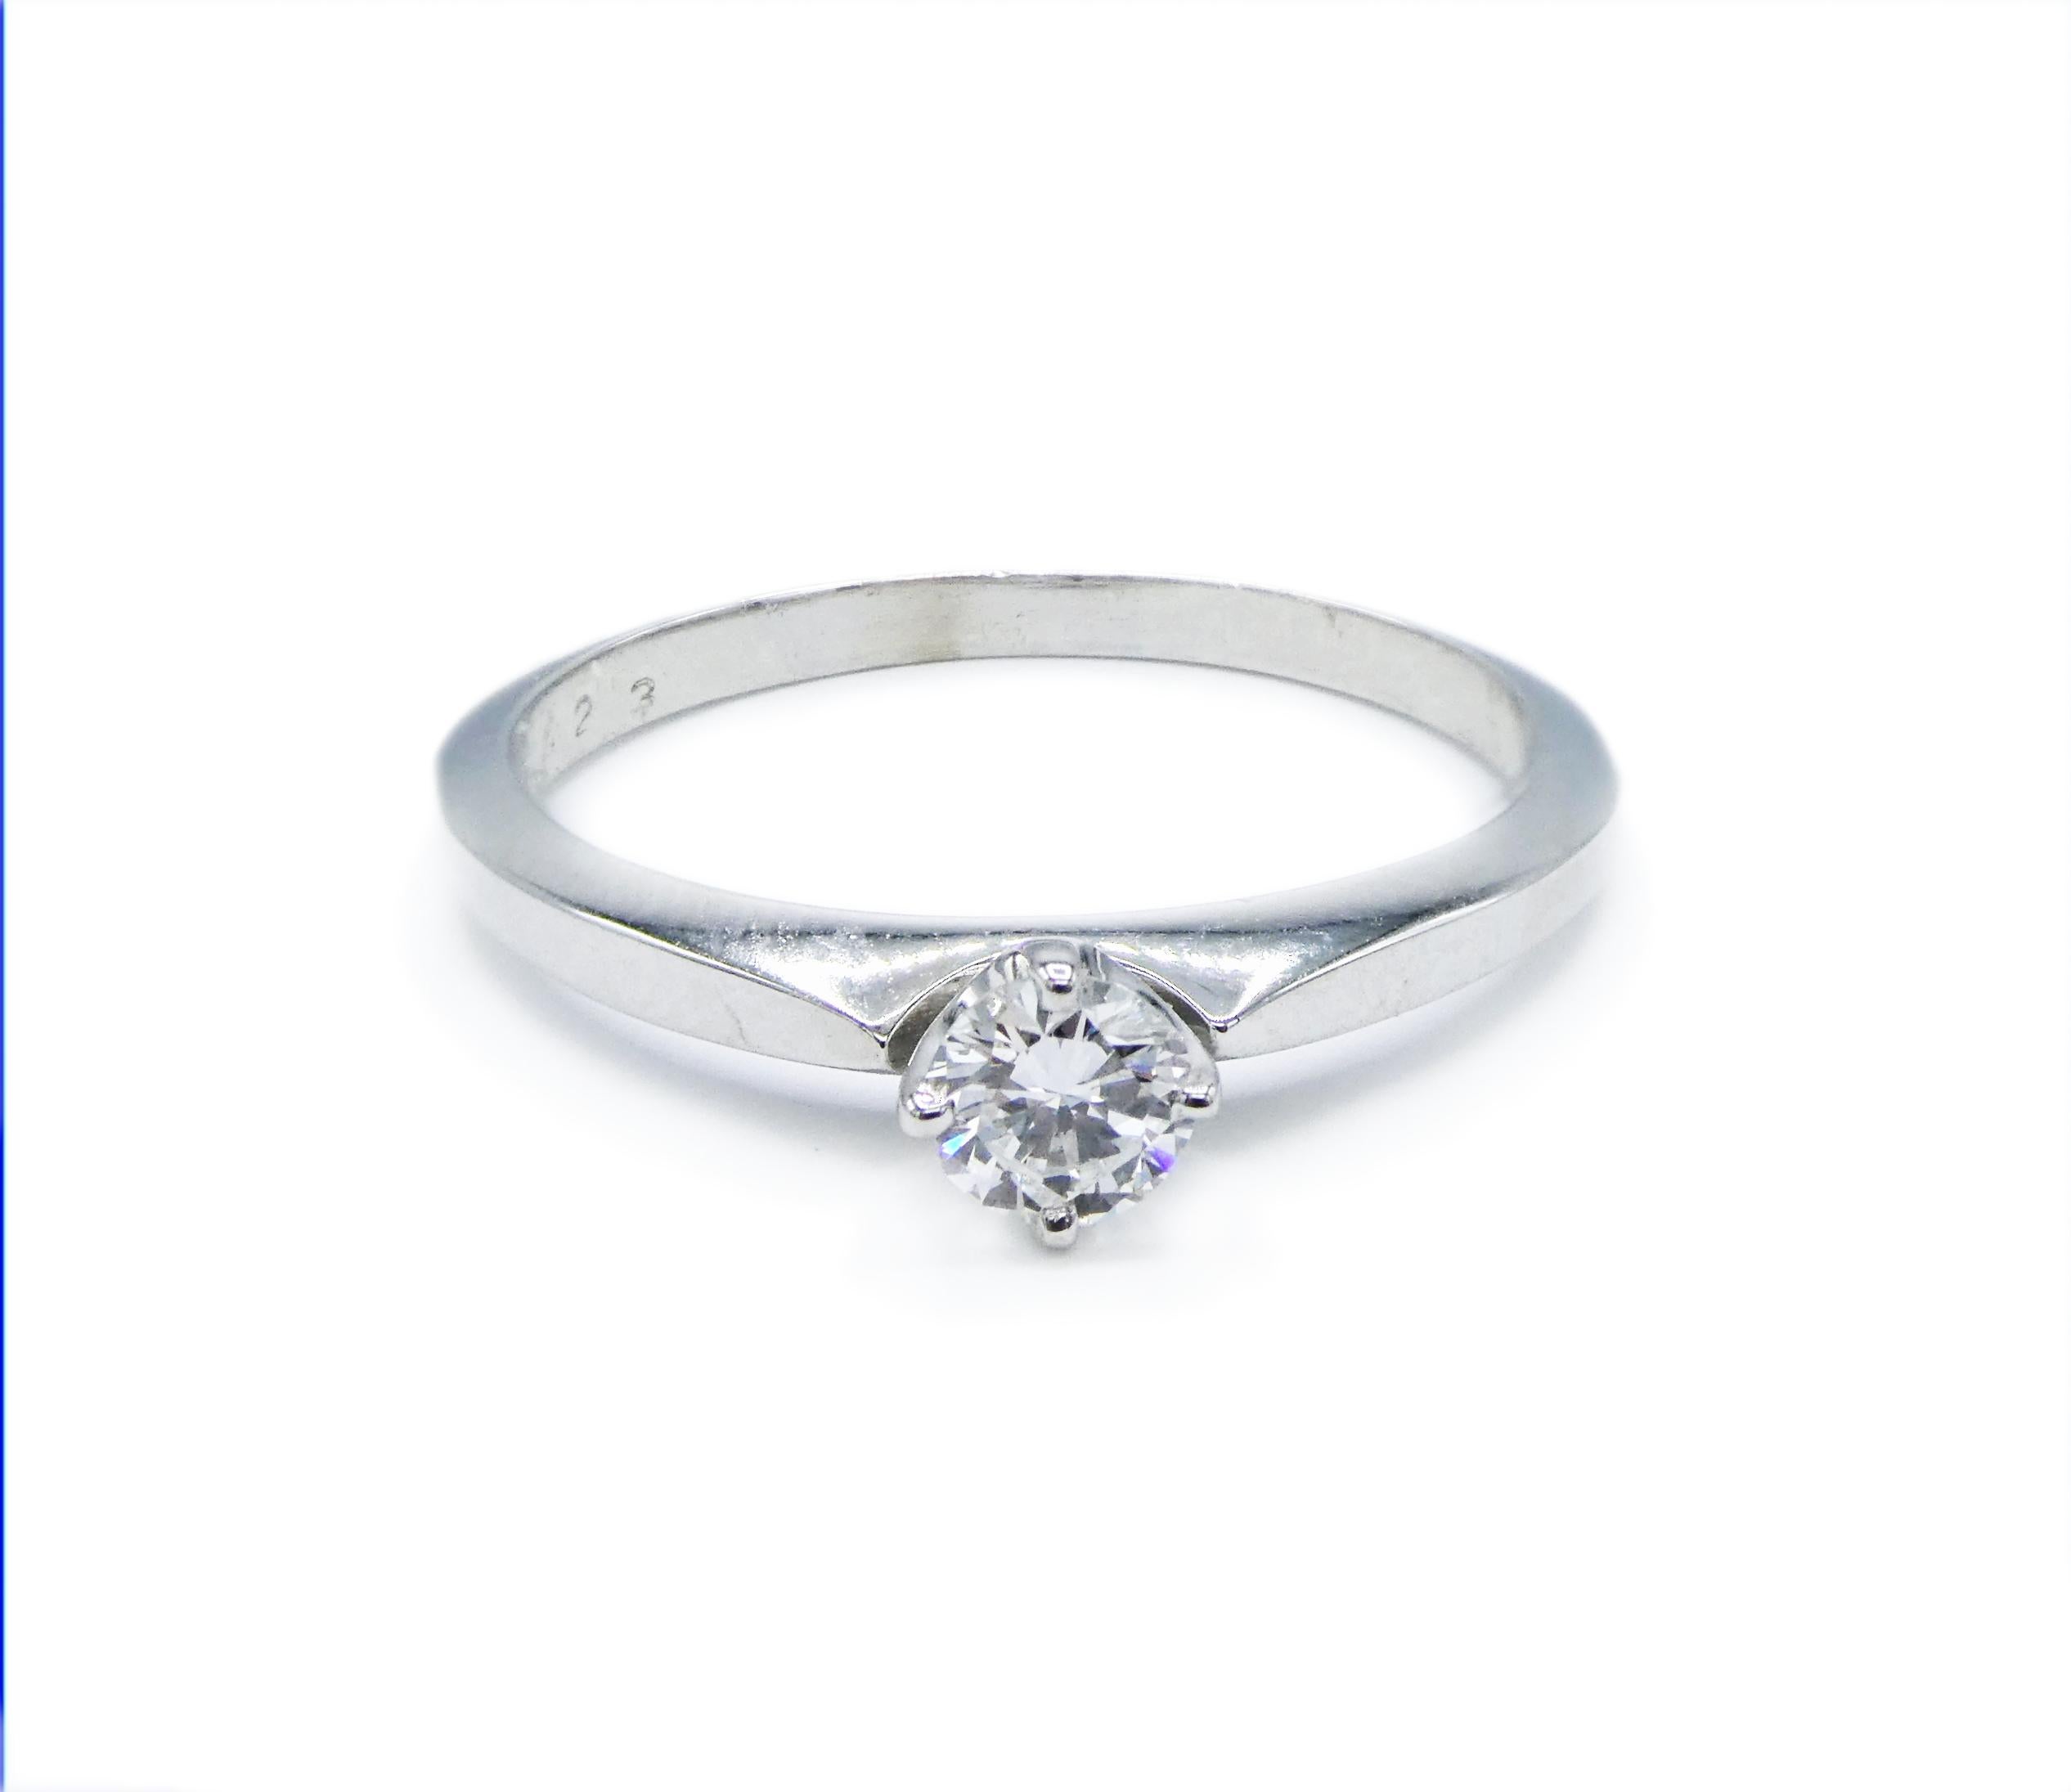 14K White Gold 0.23 Carat Round Diamond Solitaire Engagement Ring Size 5.75 

Metal: 14K White Gold
Weight: 1.71 grams
Diamond:  0.23ct Round Brilliant Cut Diamond Approx. G SI
Ring size: 5.75 (5 3/4)
Band is 1.7mm wide 
Recently polished

If you